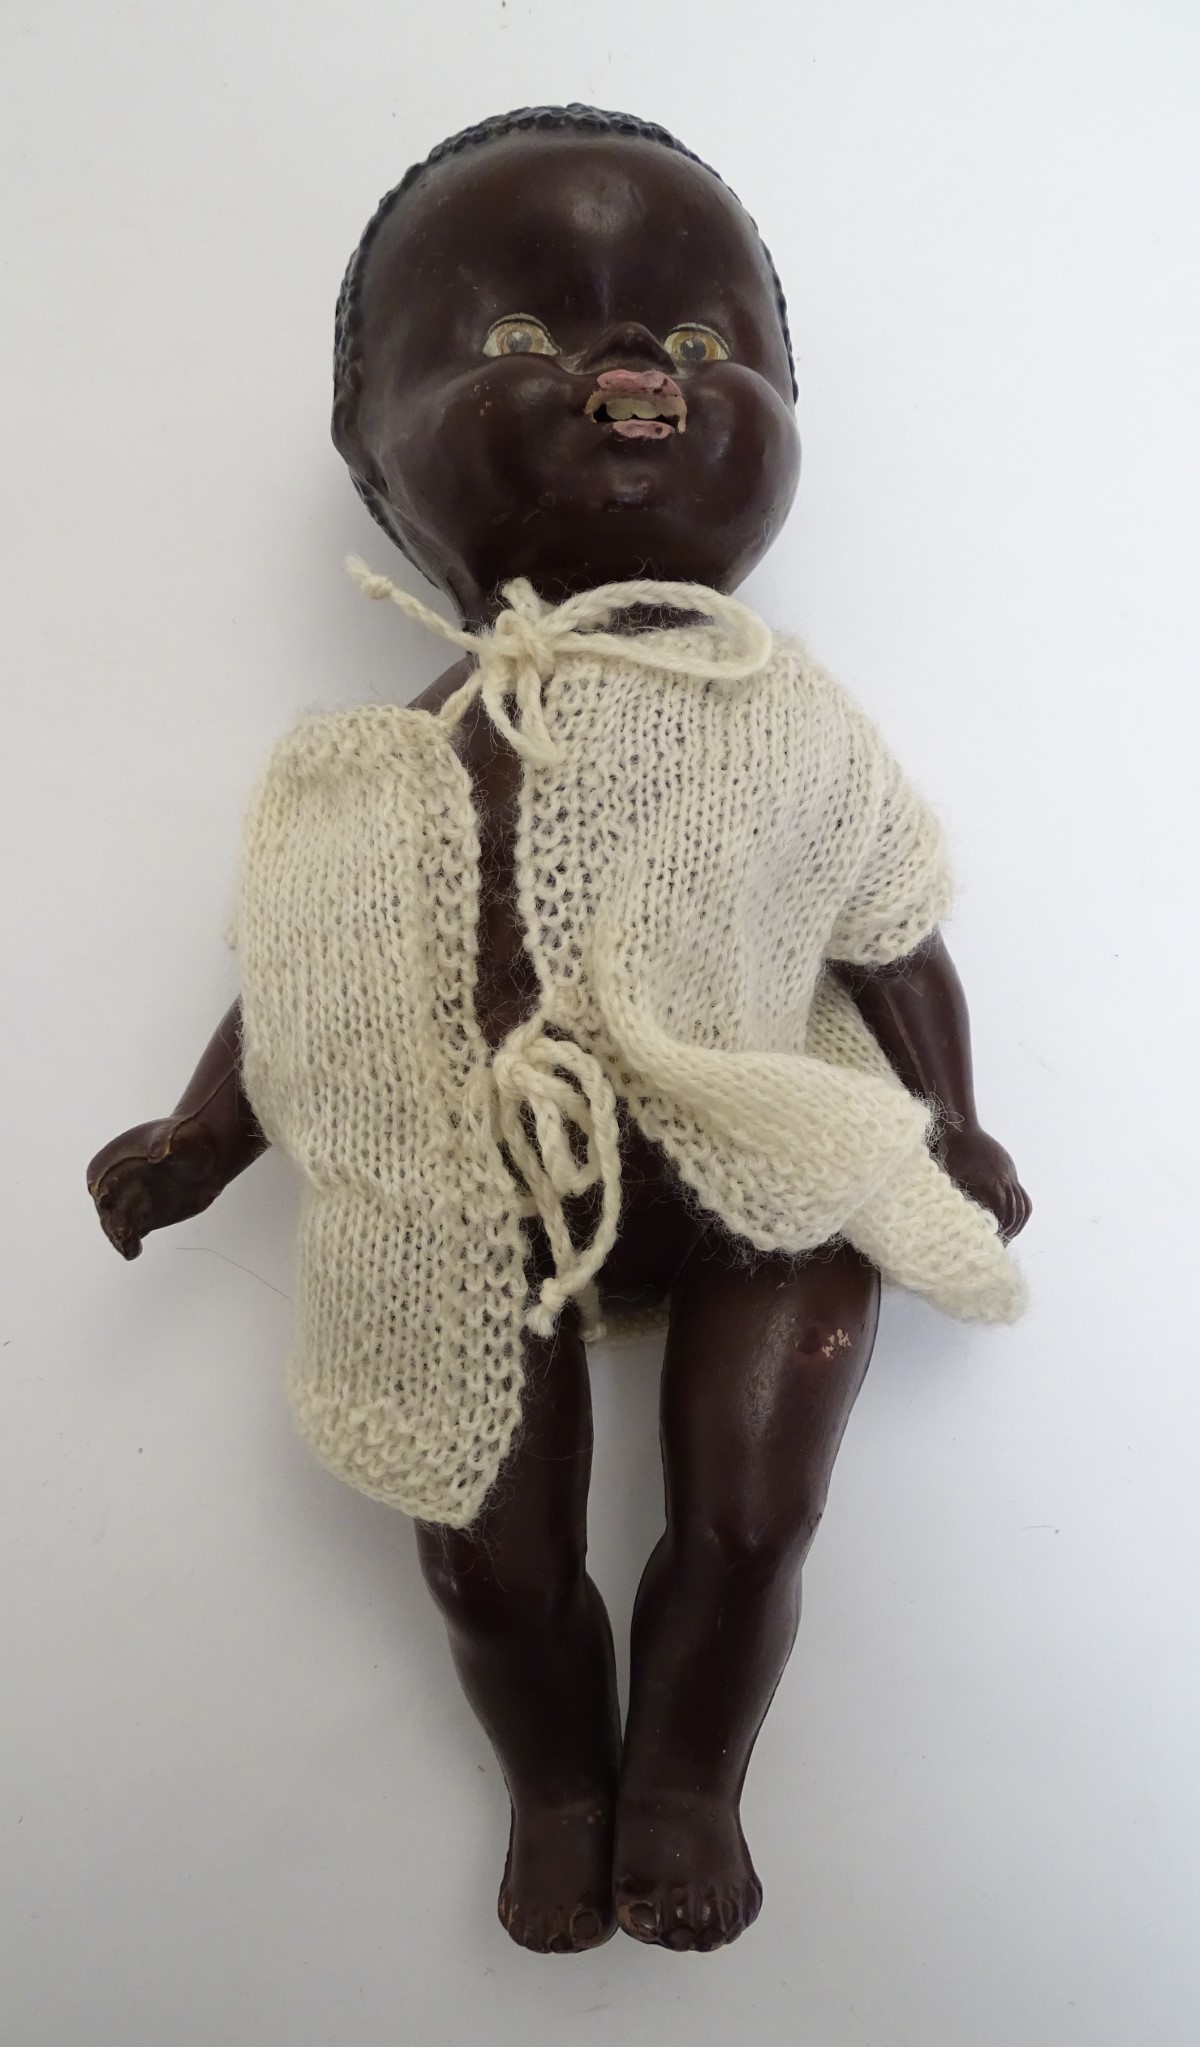 Toy: A black composite doll with articulated head, arms and legs, with modelled hair and painted